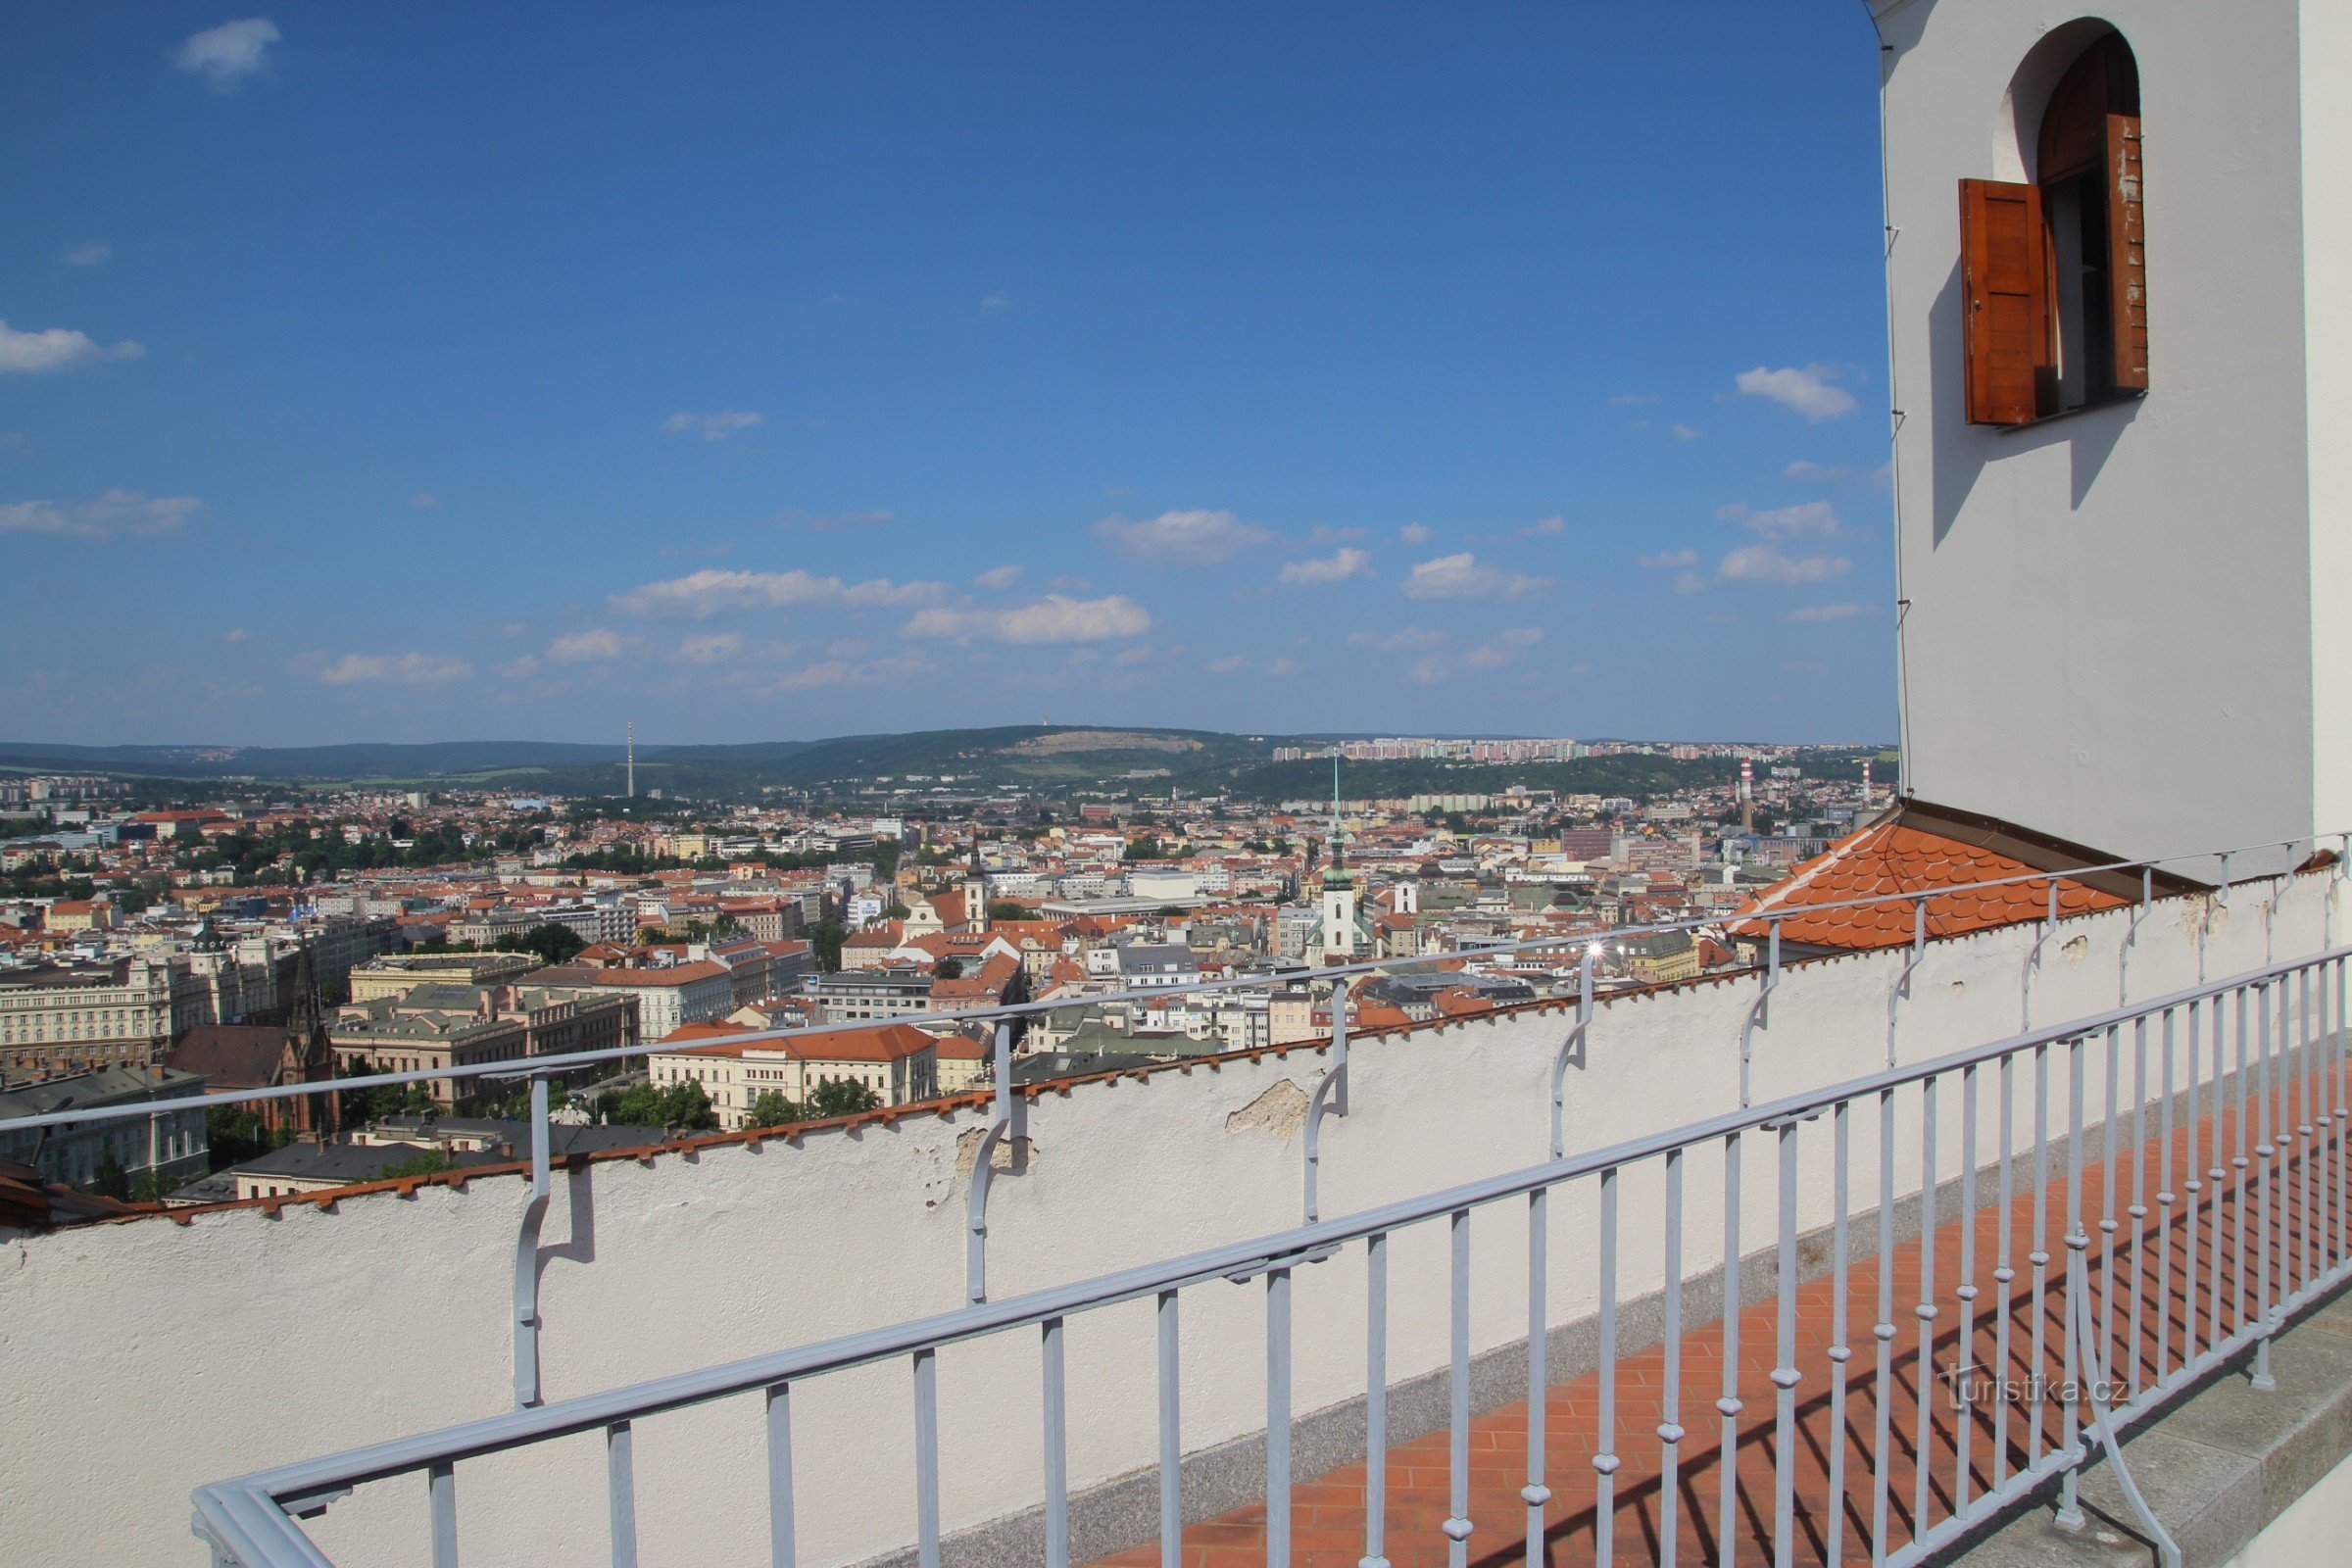 View of Brno from the viewing terrace